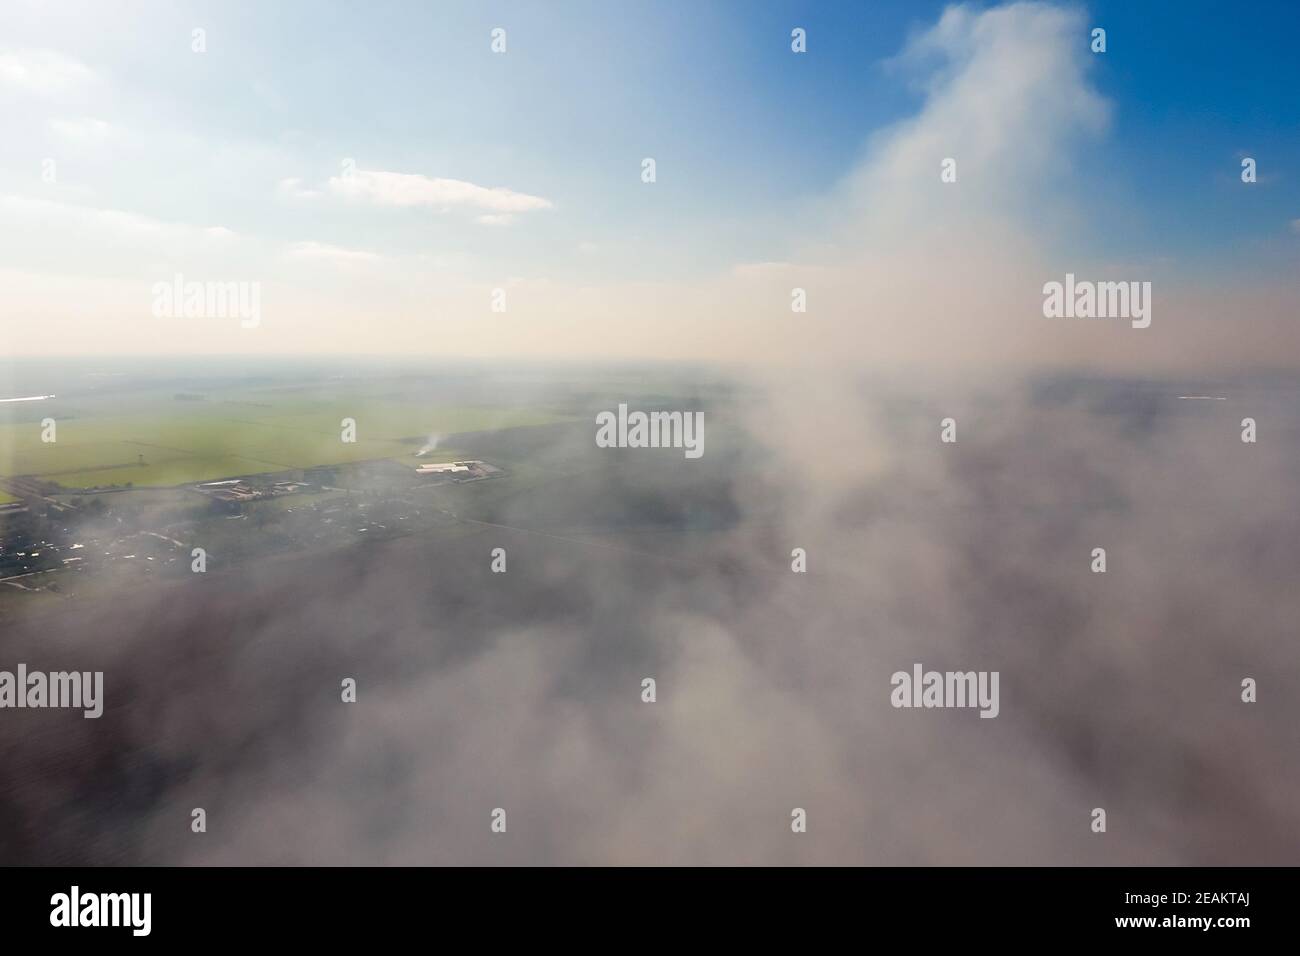 The smoke over the village. Clubs of smoke over the village houses and fields. Aerophotographing areas Stock Photo